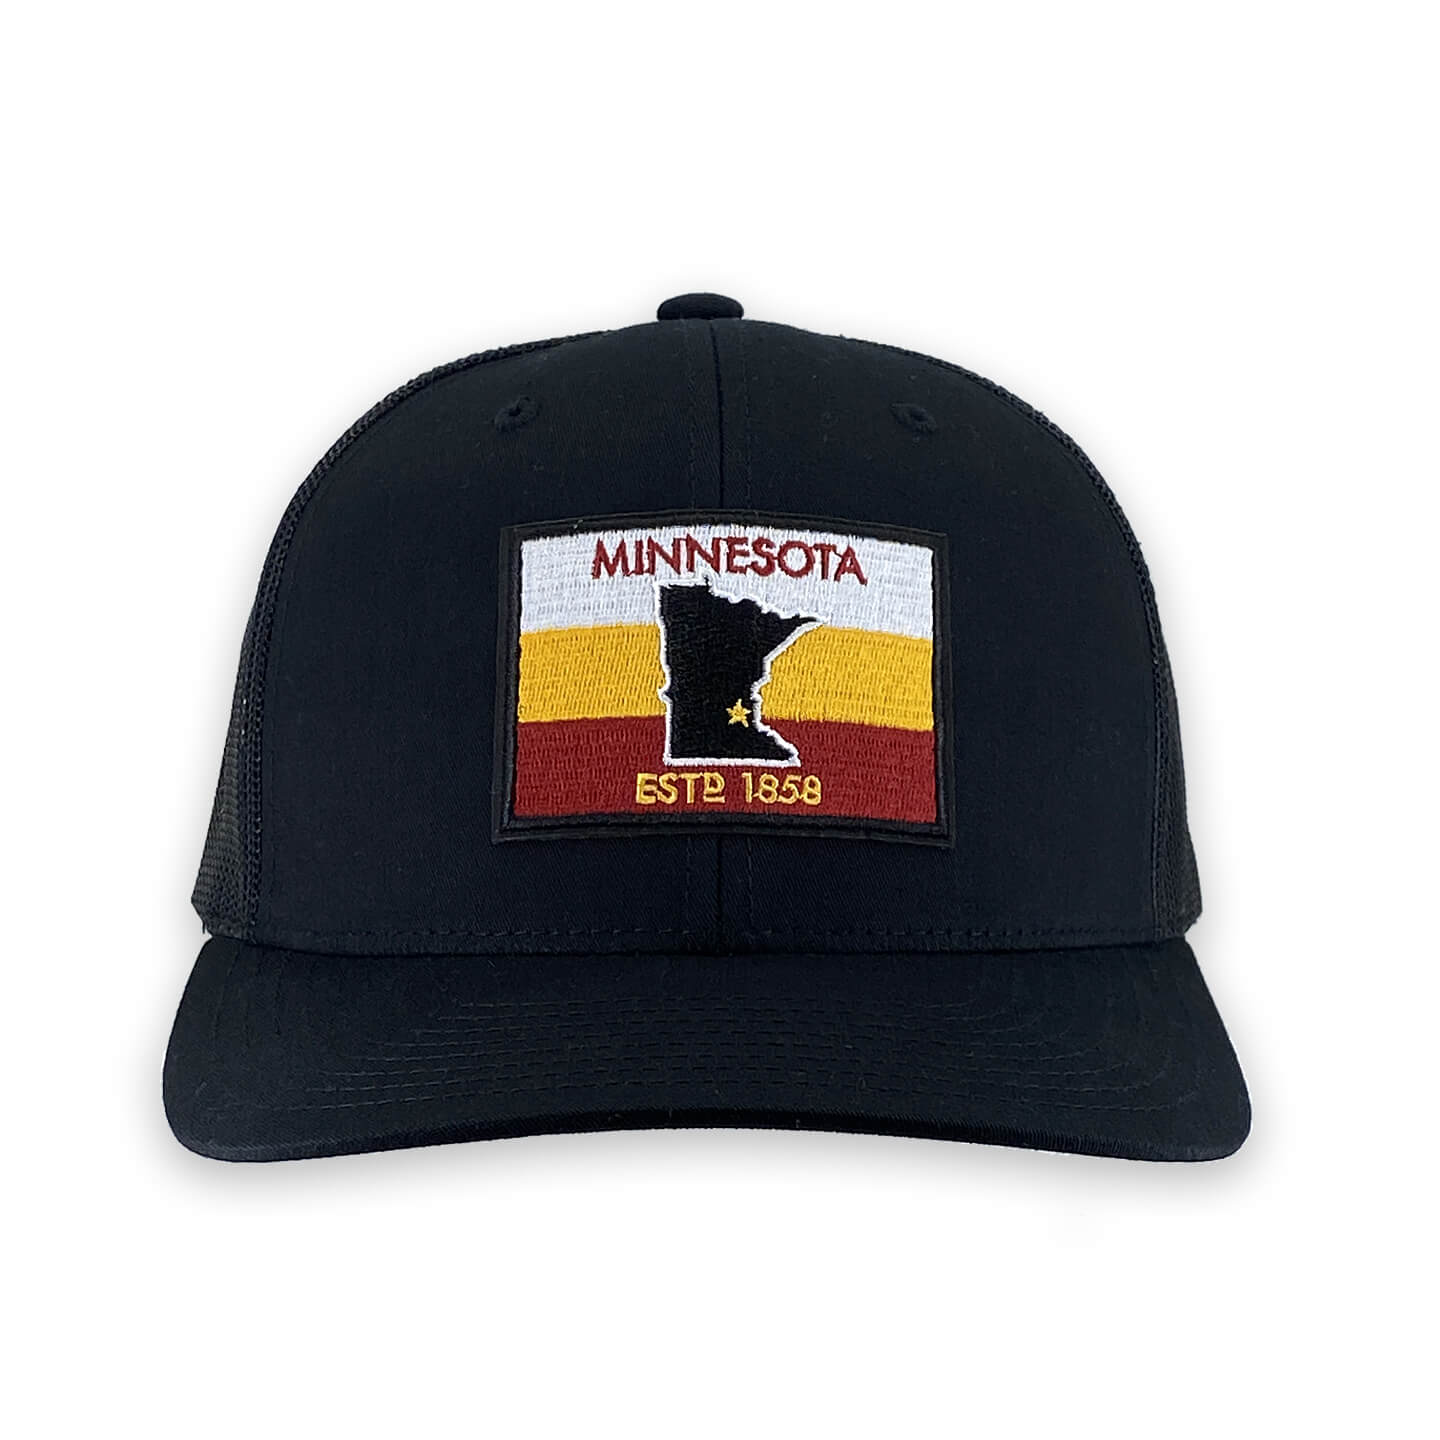 6 Panel Snapback Trucker Hat with Maroon and Gold Minnesota Est'd flag patch